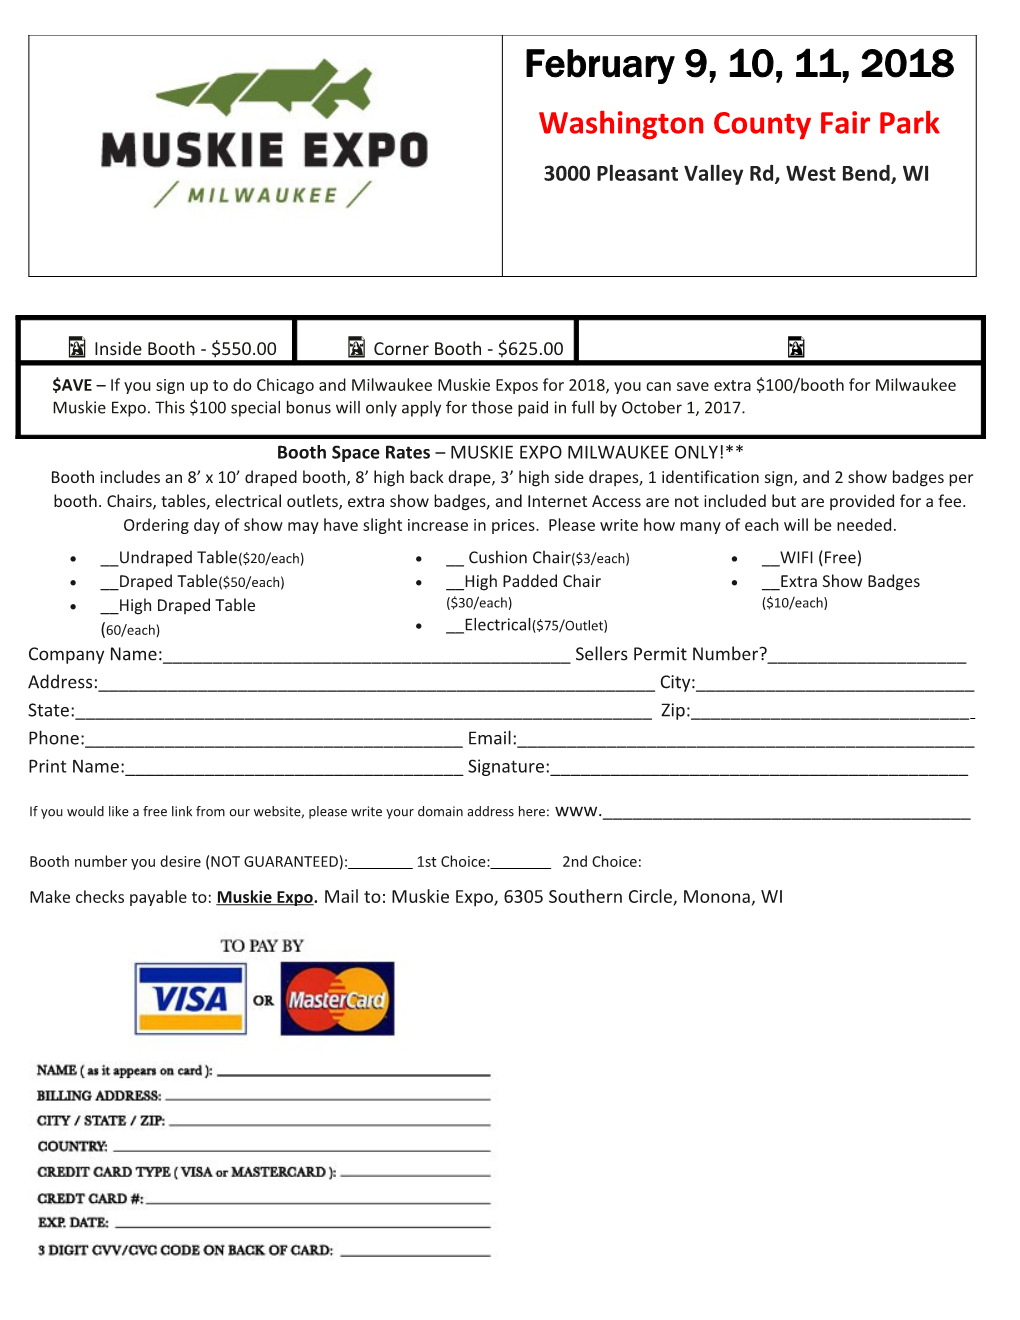 Booth Space Rates MUSKIE EXPO MILWAUKEE ONLY!